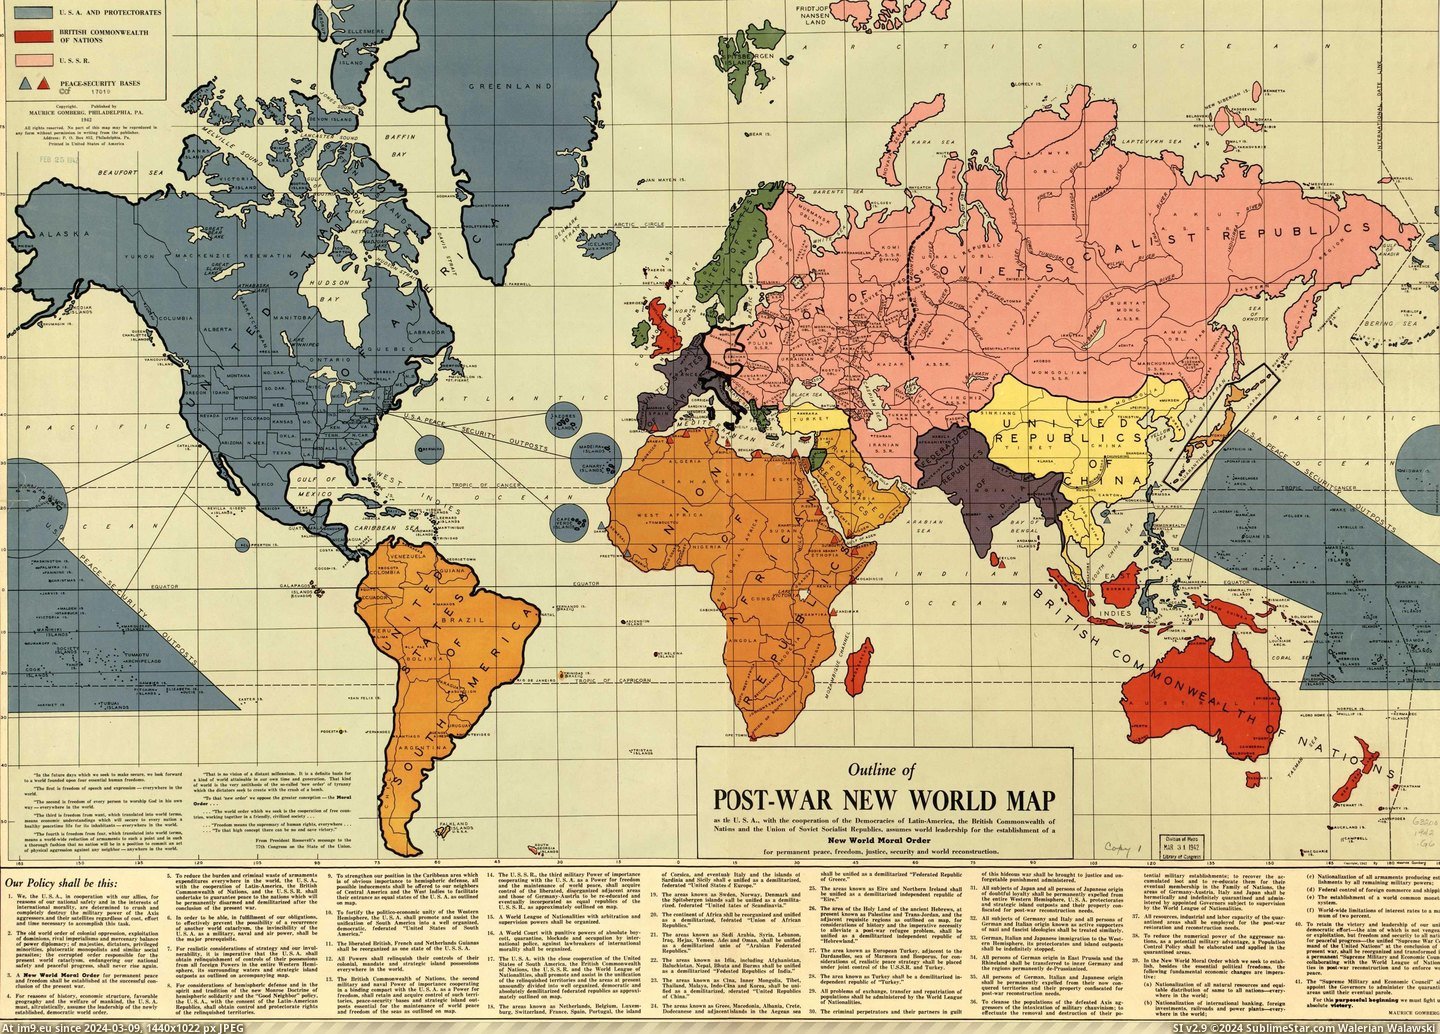 #World #War #Outline #Map [Mapporn] Outline of the Post-War New World Map [3972x2832] Pic. (Изображение из альбом My r/MAPS favs))